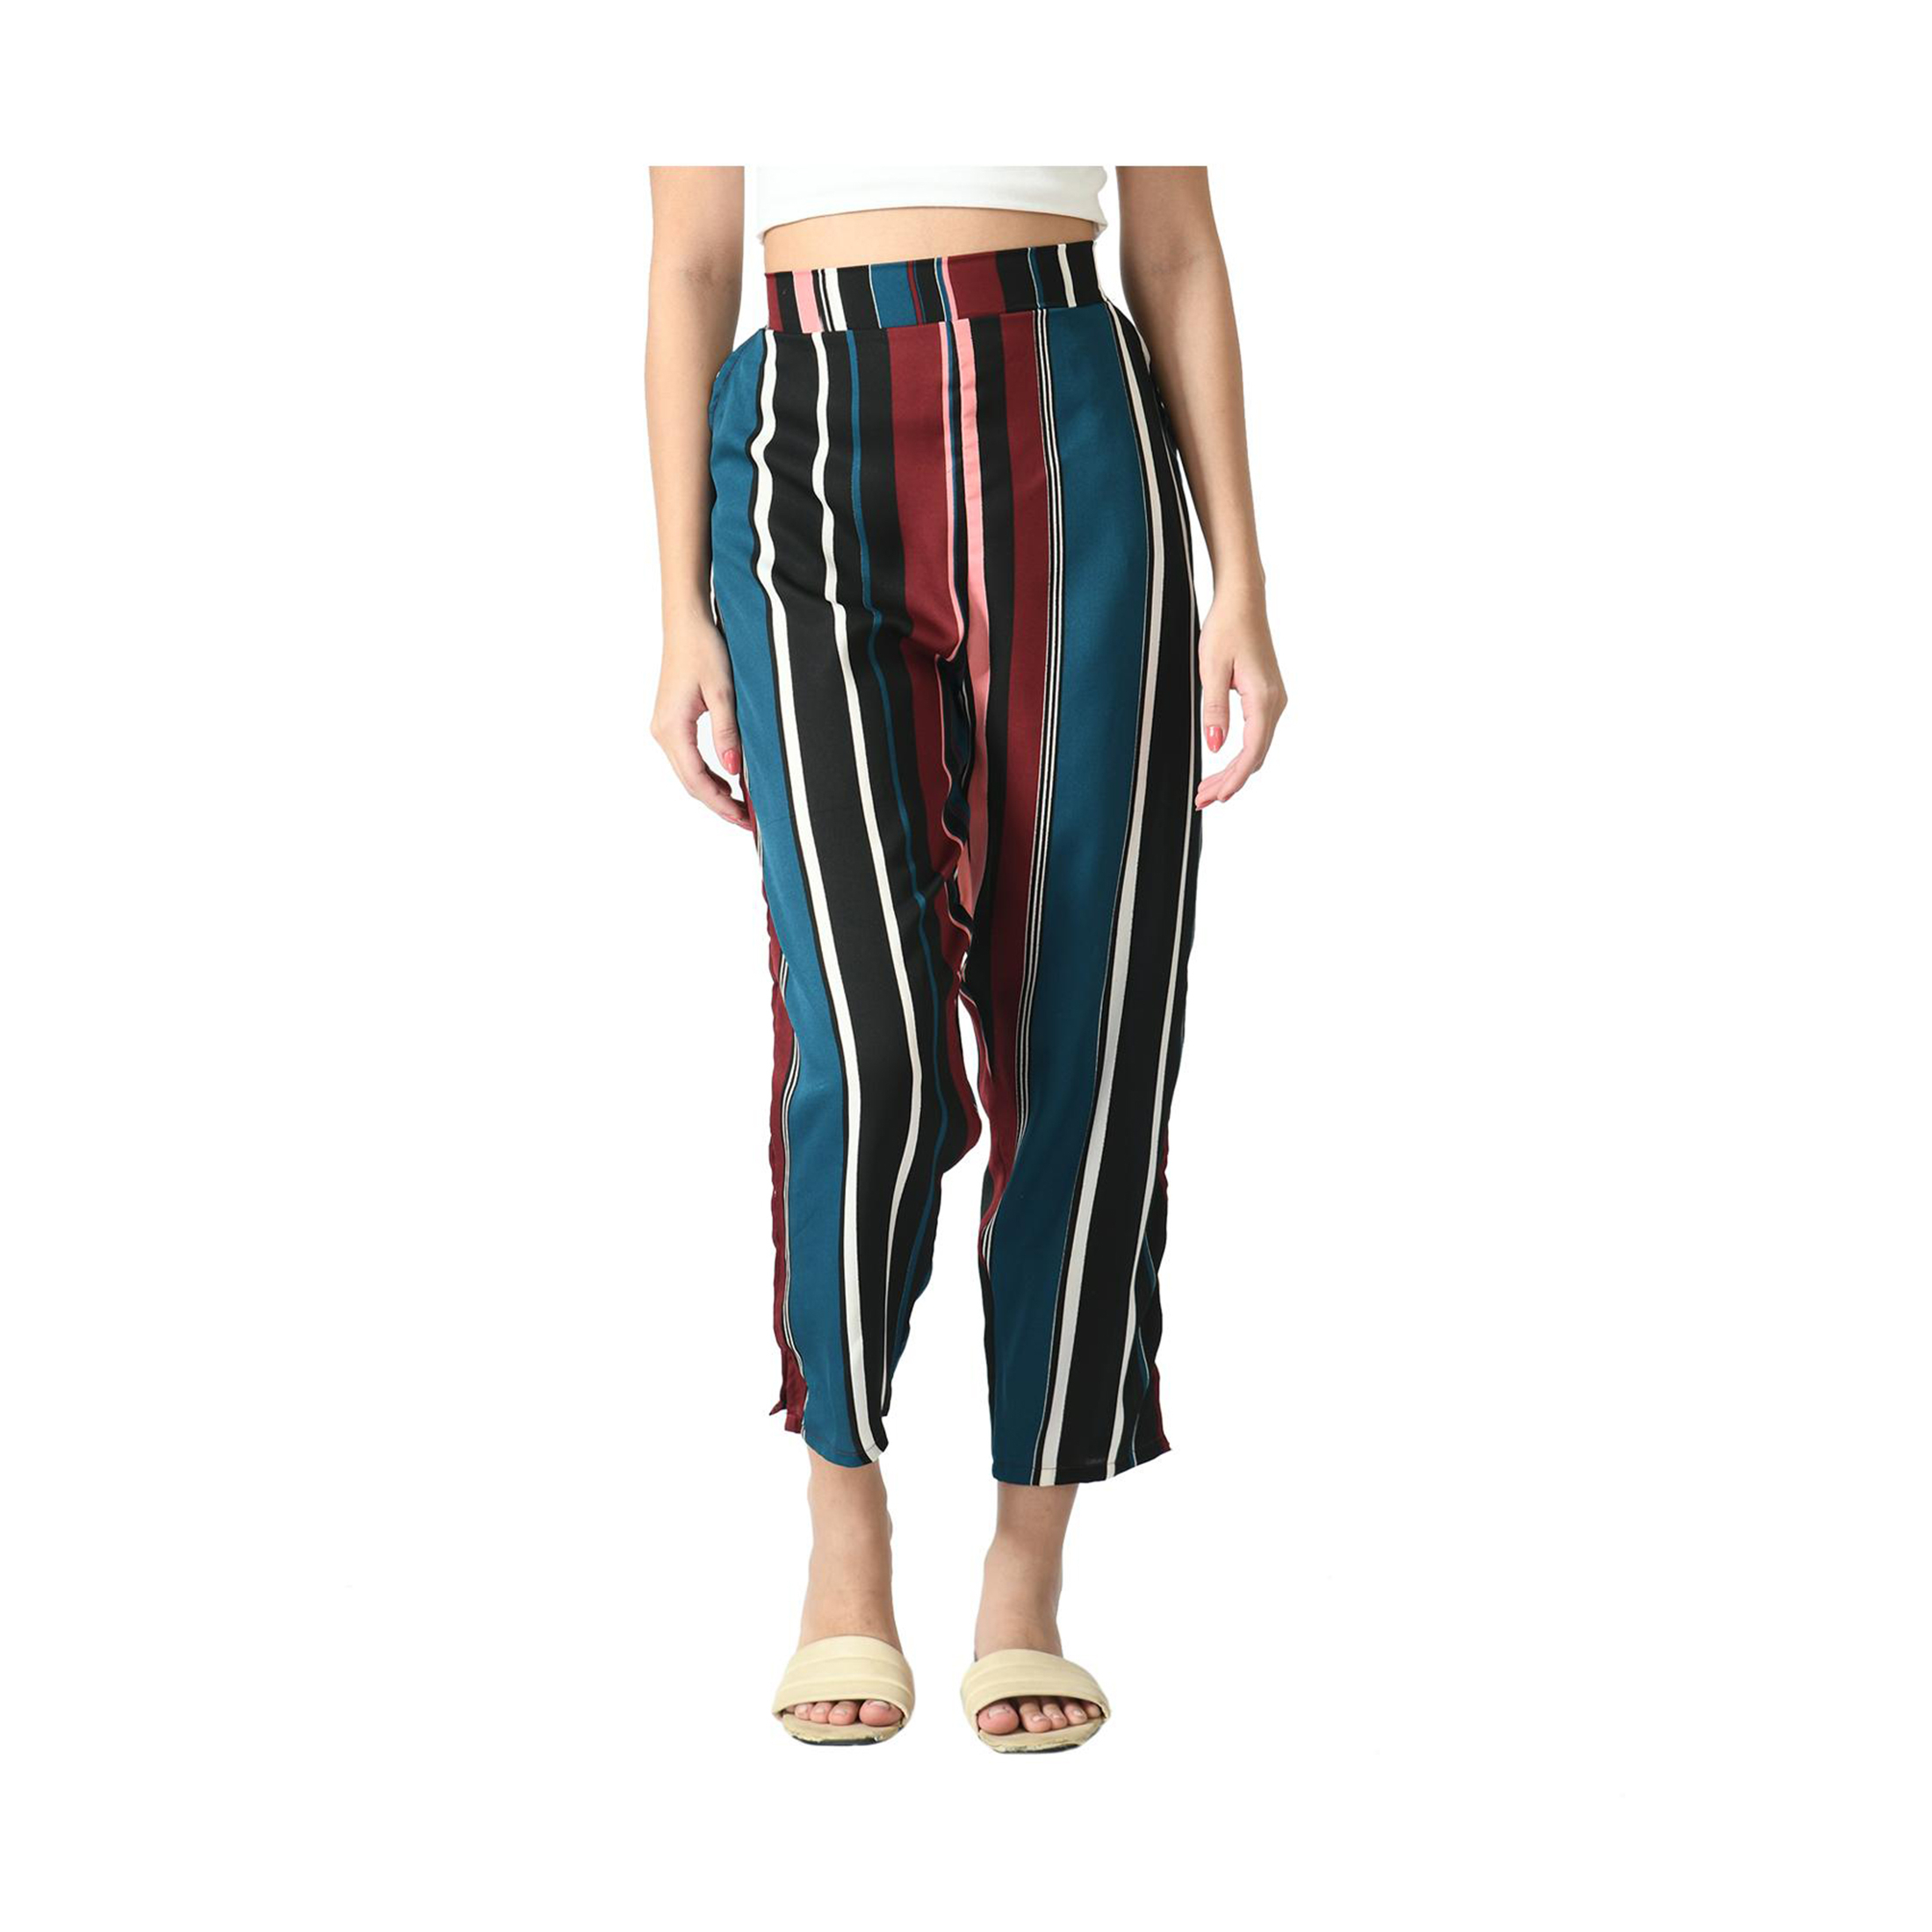 3-Pack: Ladies Striped High Waisted Summer Soft Wide Open Boho Leg Palazzo Pants - XX-Large